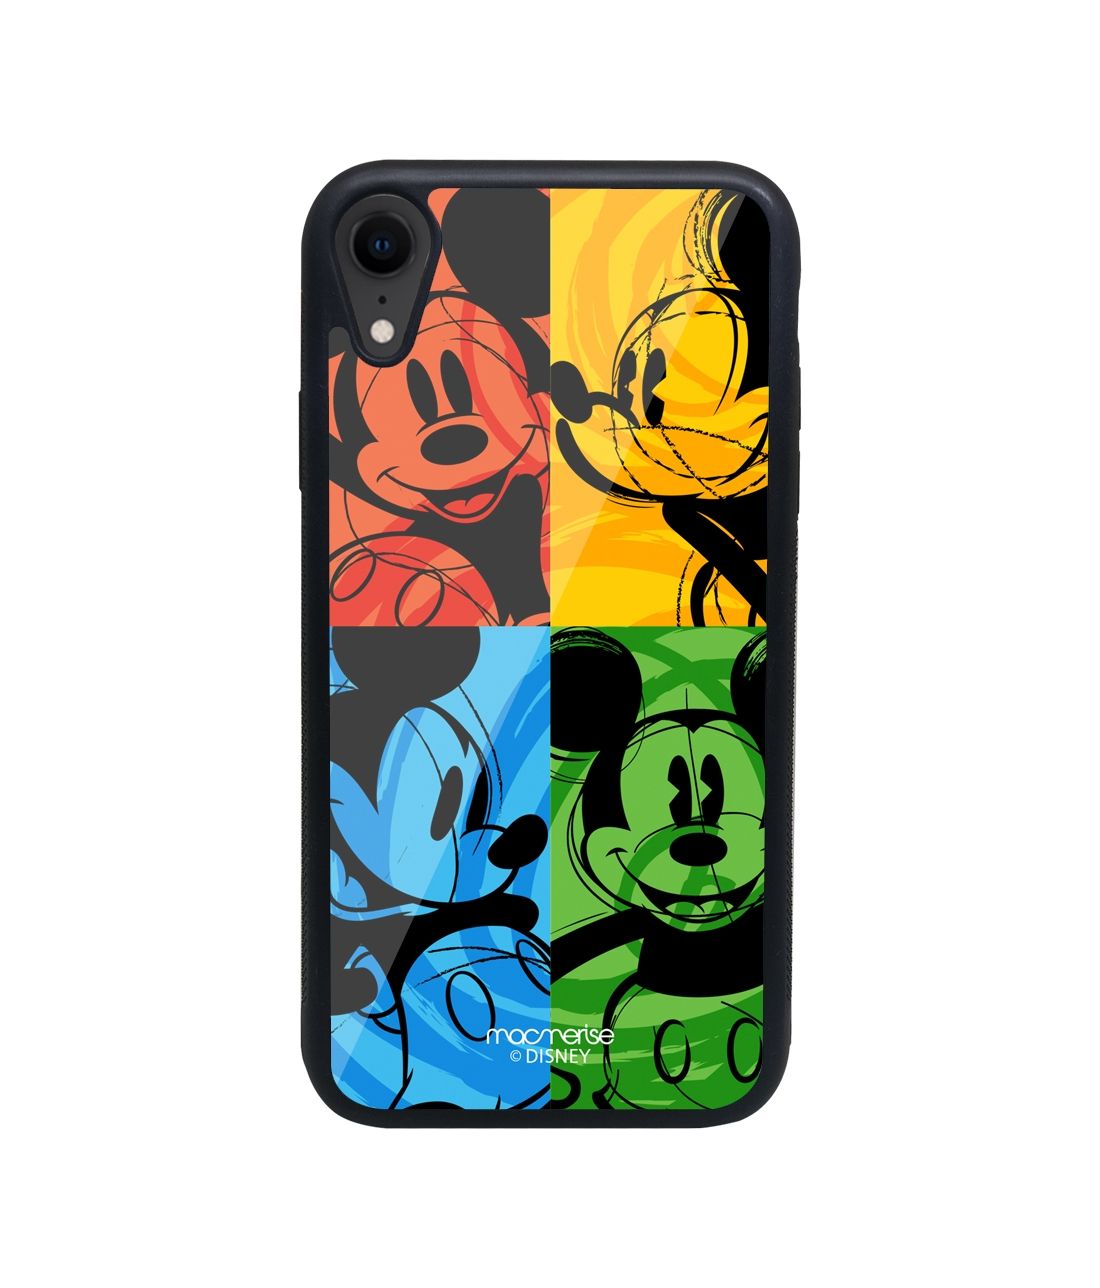 Shades of Mickey - Glass Phone Case for iPhone XR